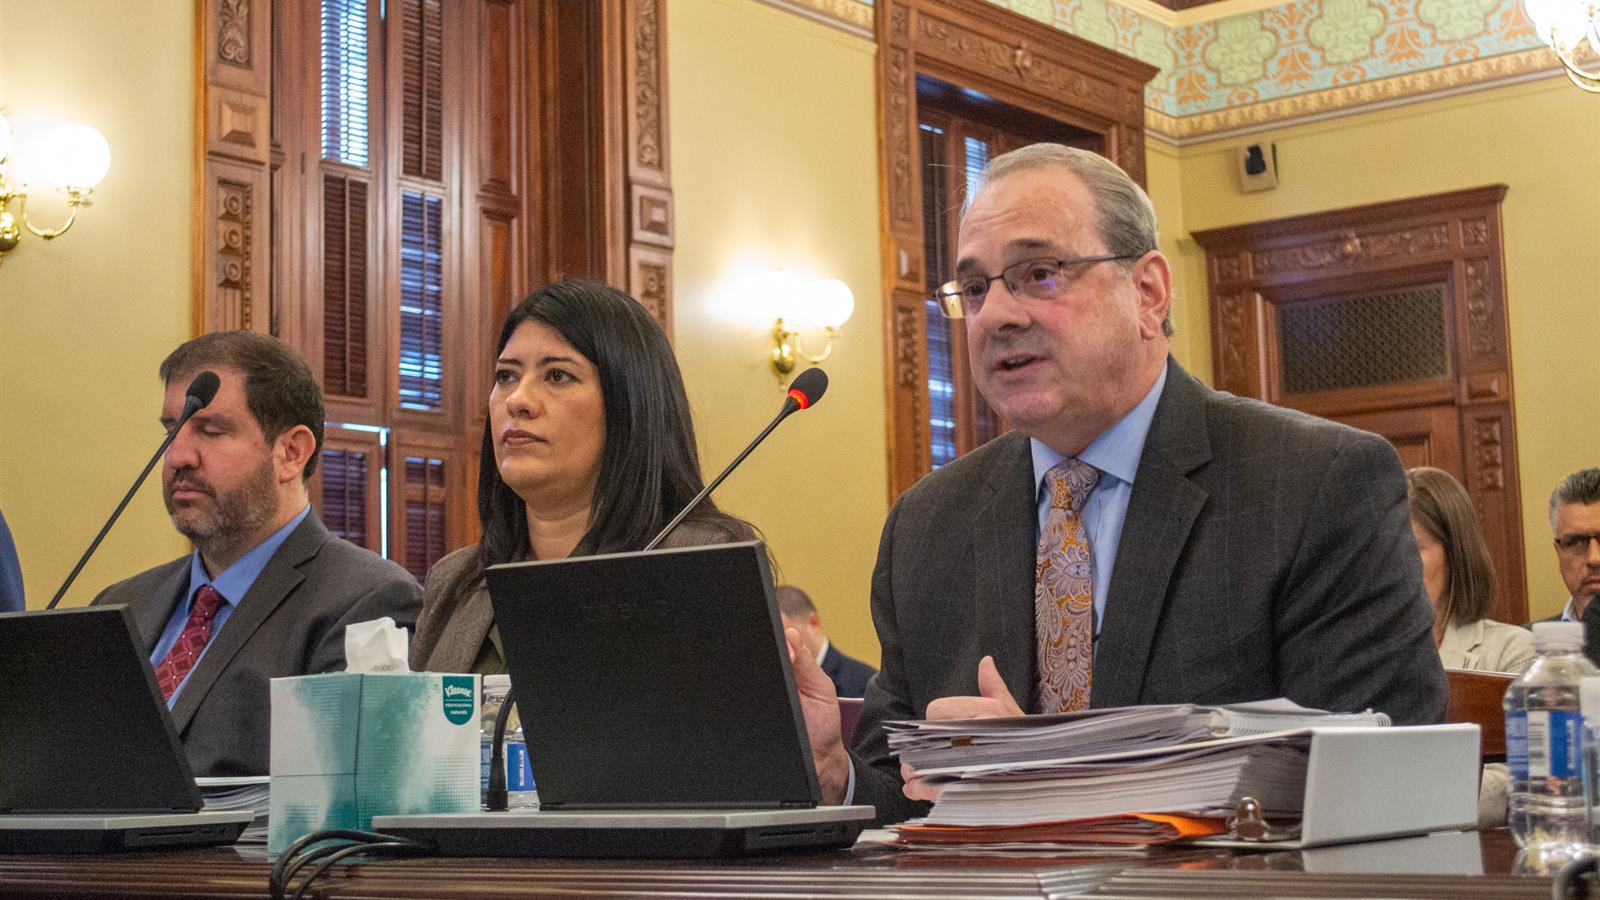 Ray Marchiori, acting director of the Illinois Department of Employment Security, testifies before the Legislative Audit Commission on Nov. 7, 2023, about the agency’s handling of unemployment claims during the COVID-19 pandemic. (Jerry Nowicki / Capitol News Illinois)